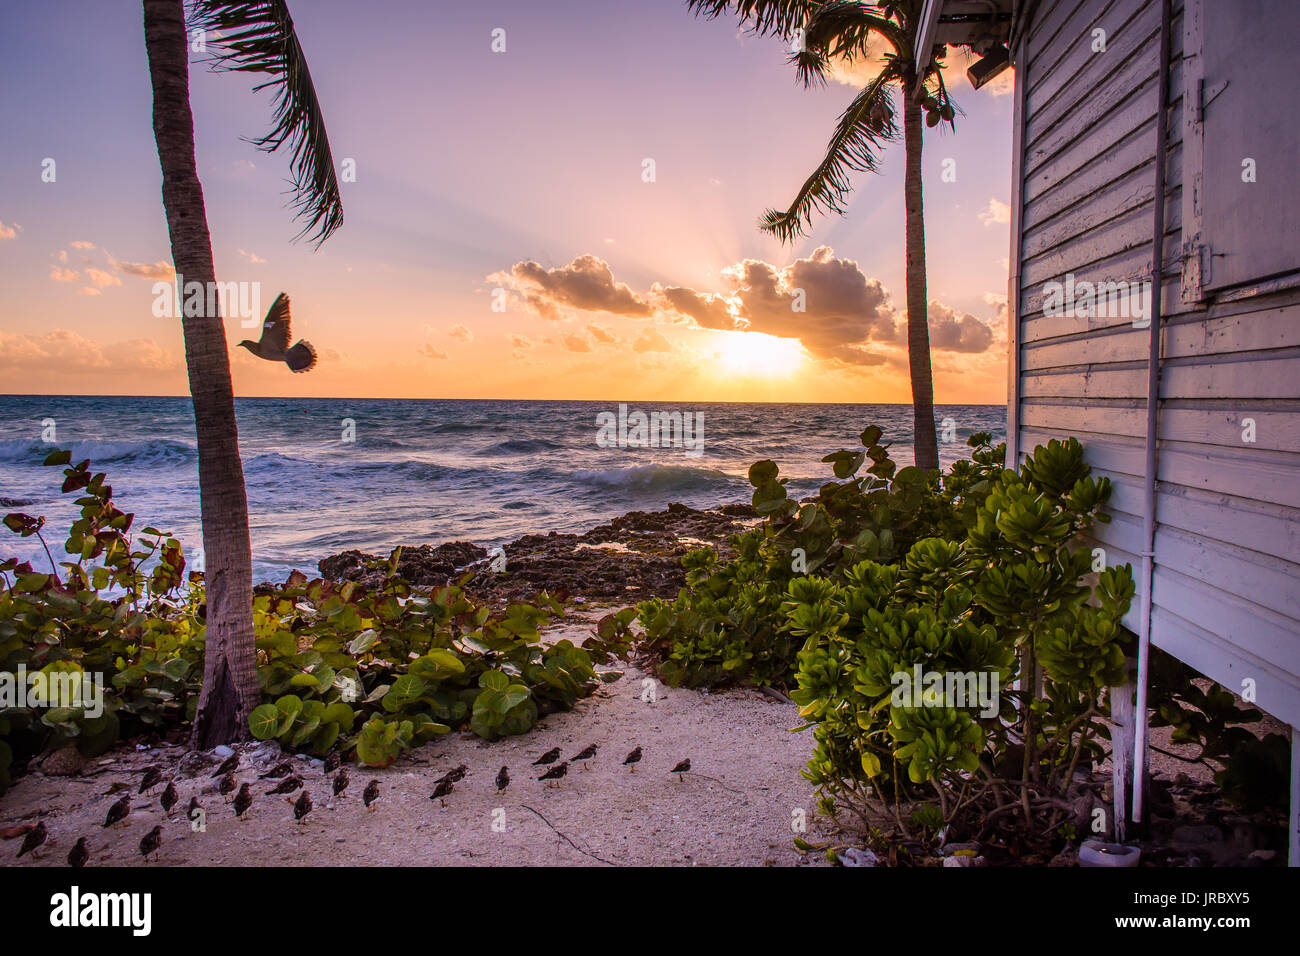 Birds captured in a beautiful sunset in the Cayman Islands. Stock Photo